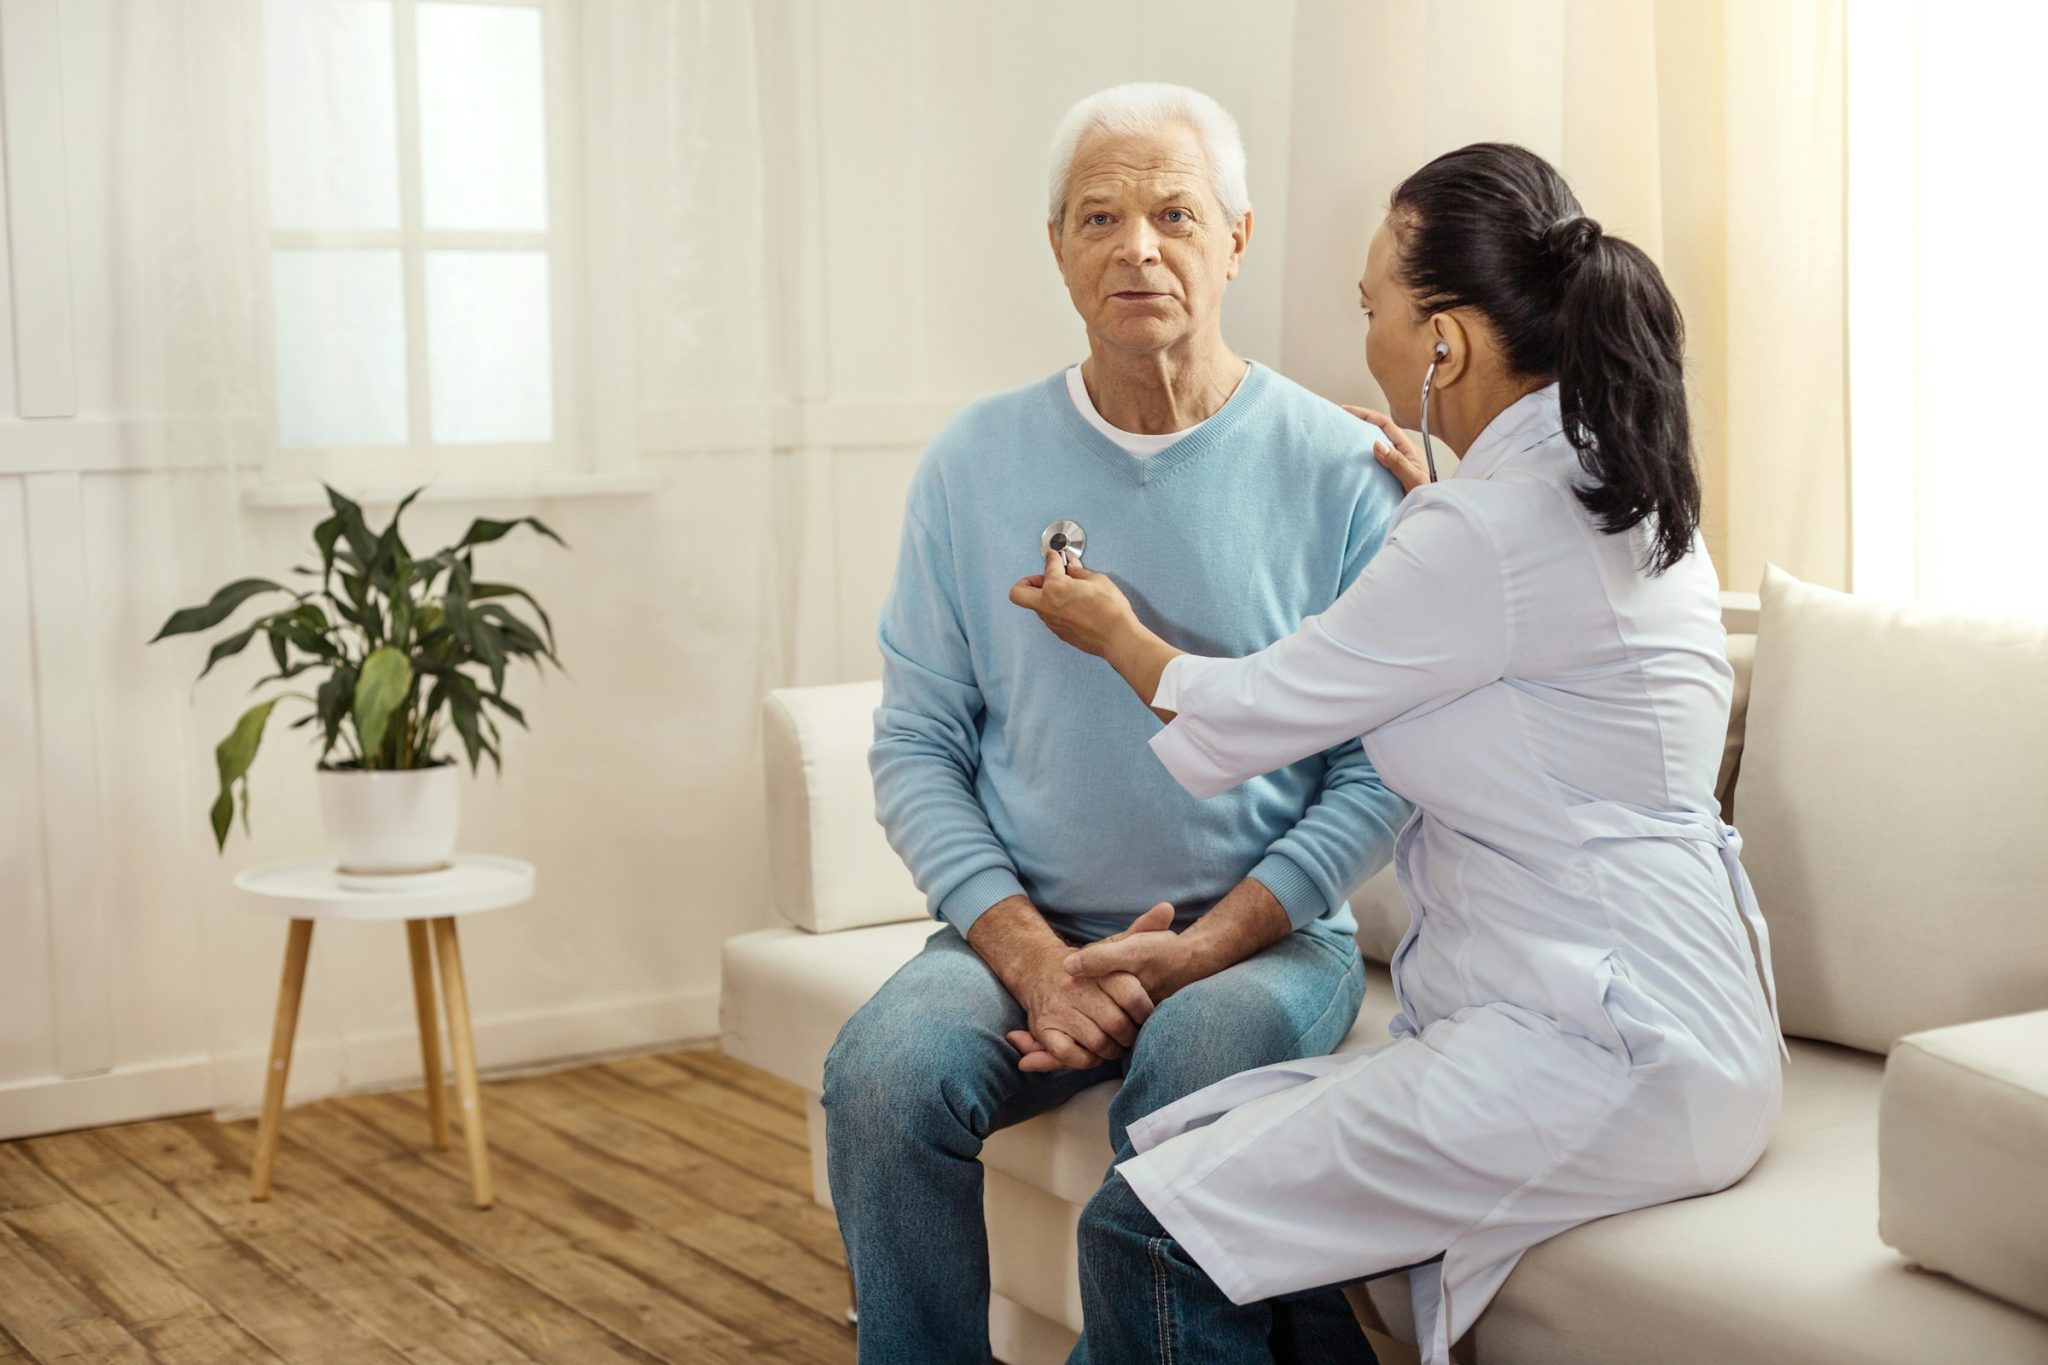 Key factors to consider if you need to receive medical care